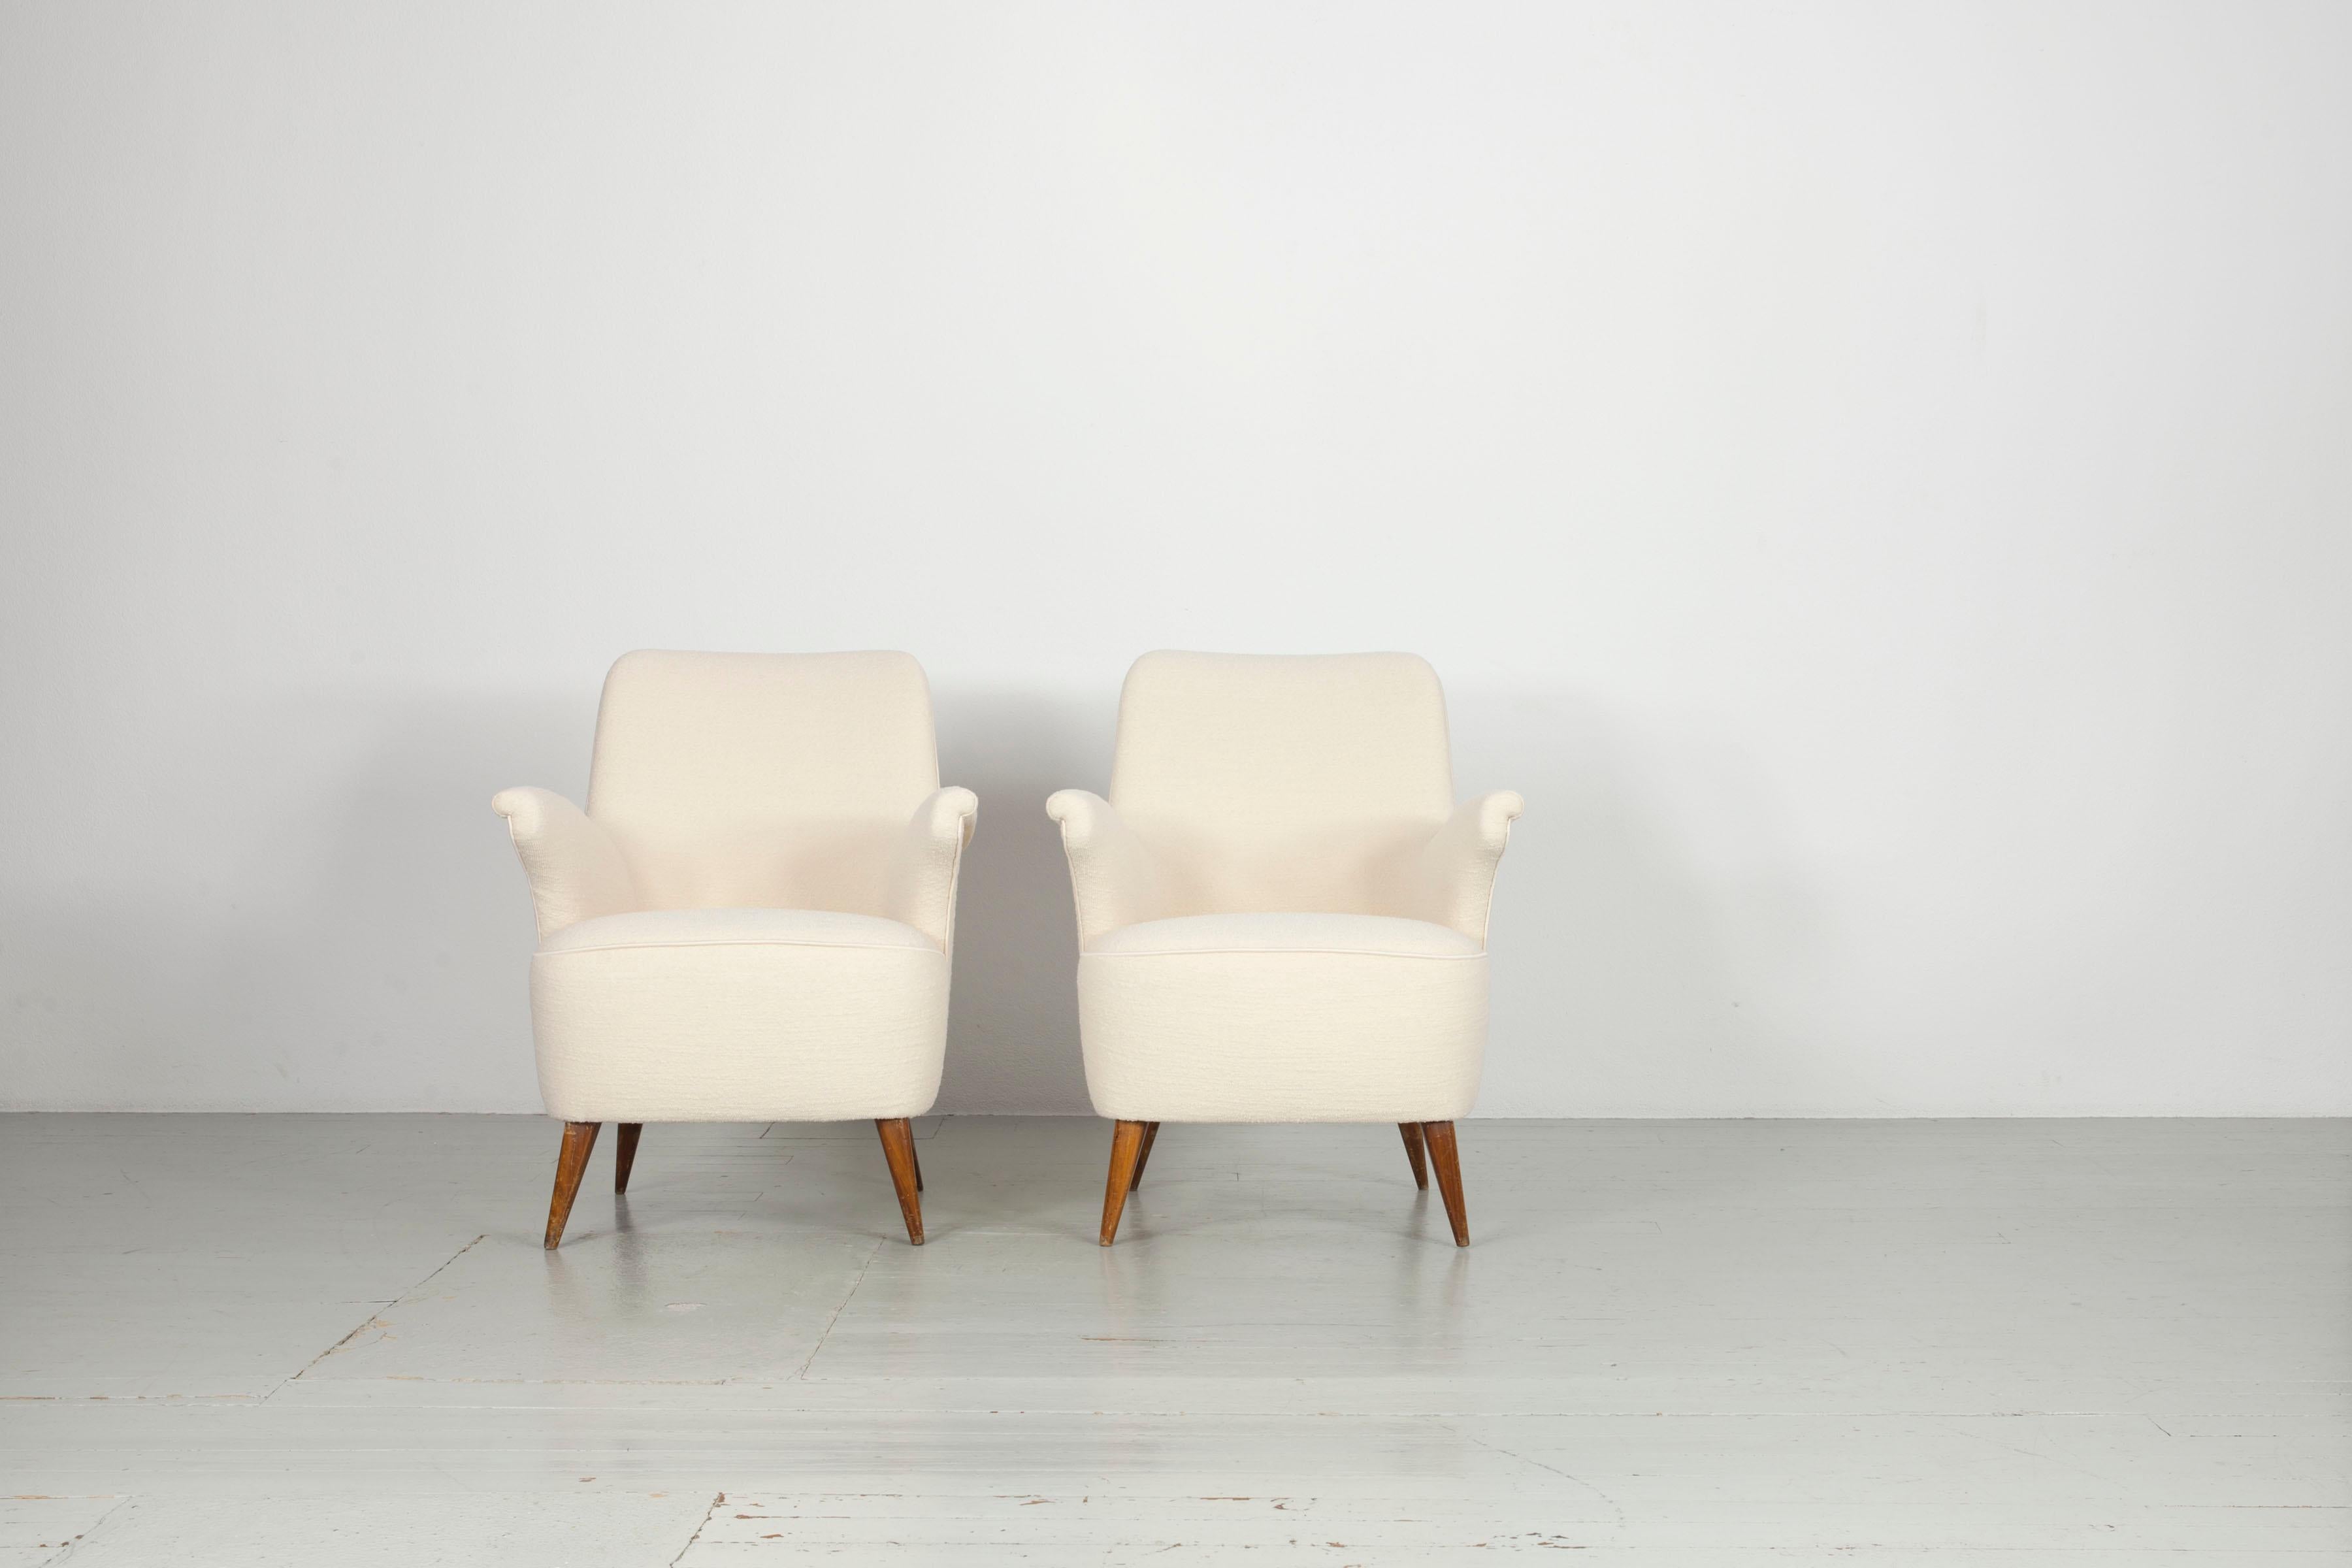 Textile Set of 2 Cream Coloured Italian Marine Armchairs from the 1950s For Sale